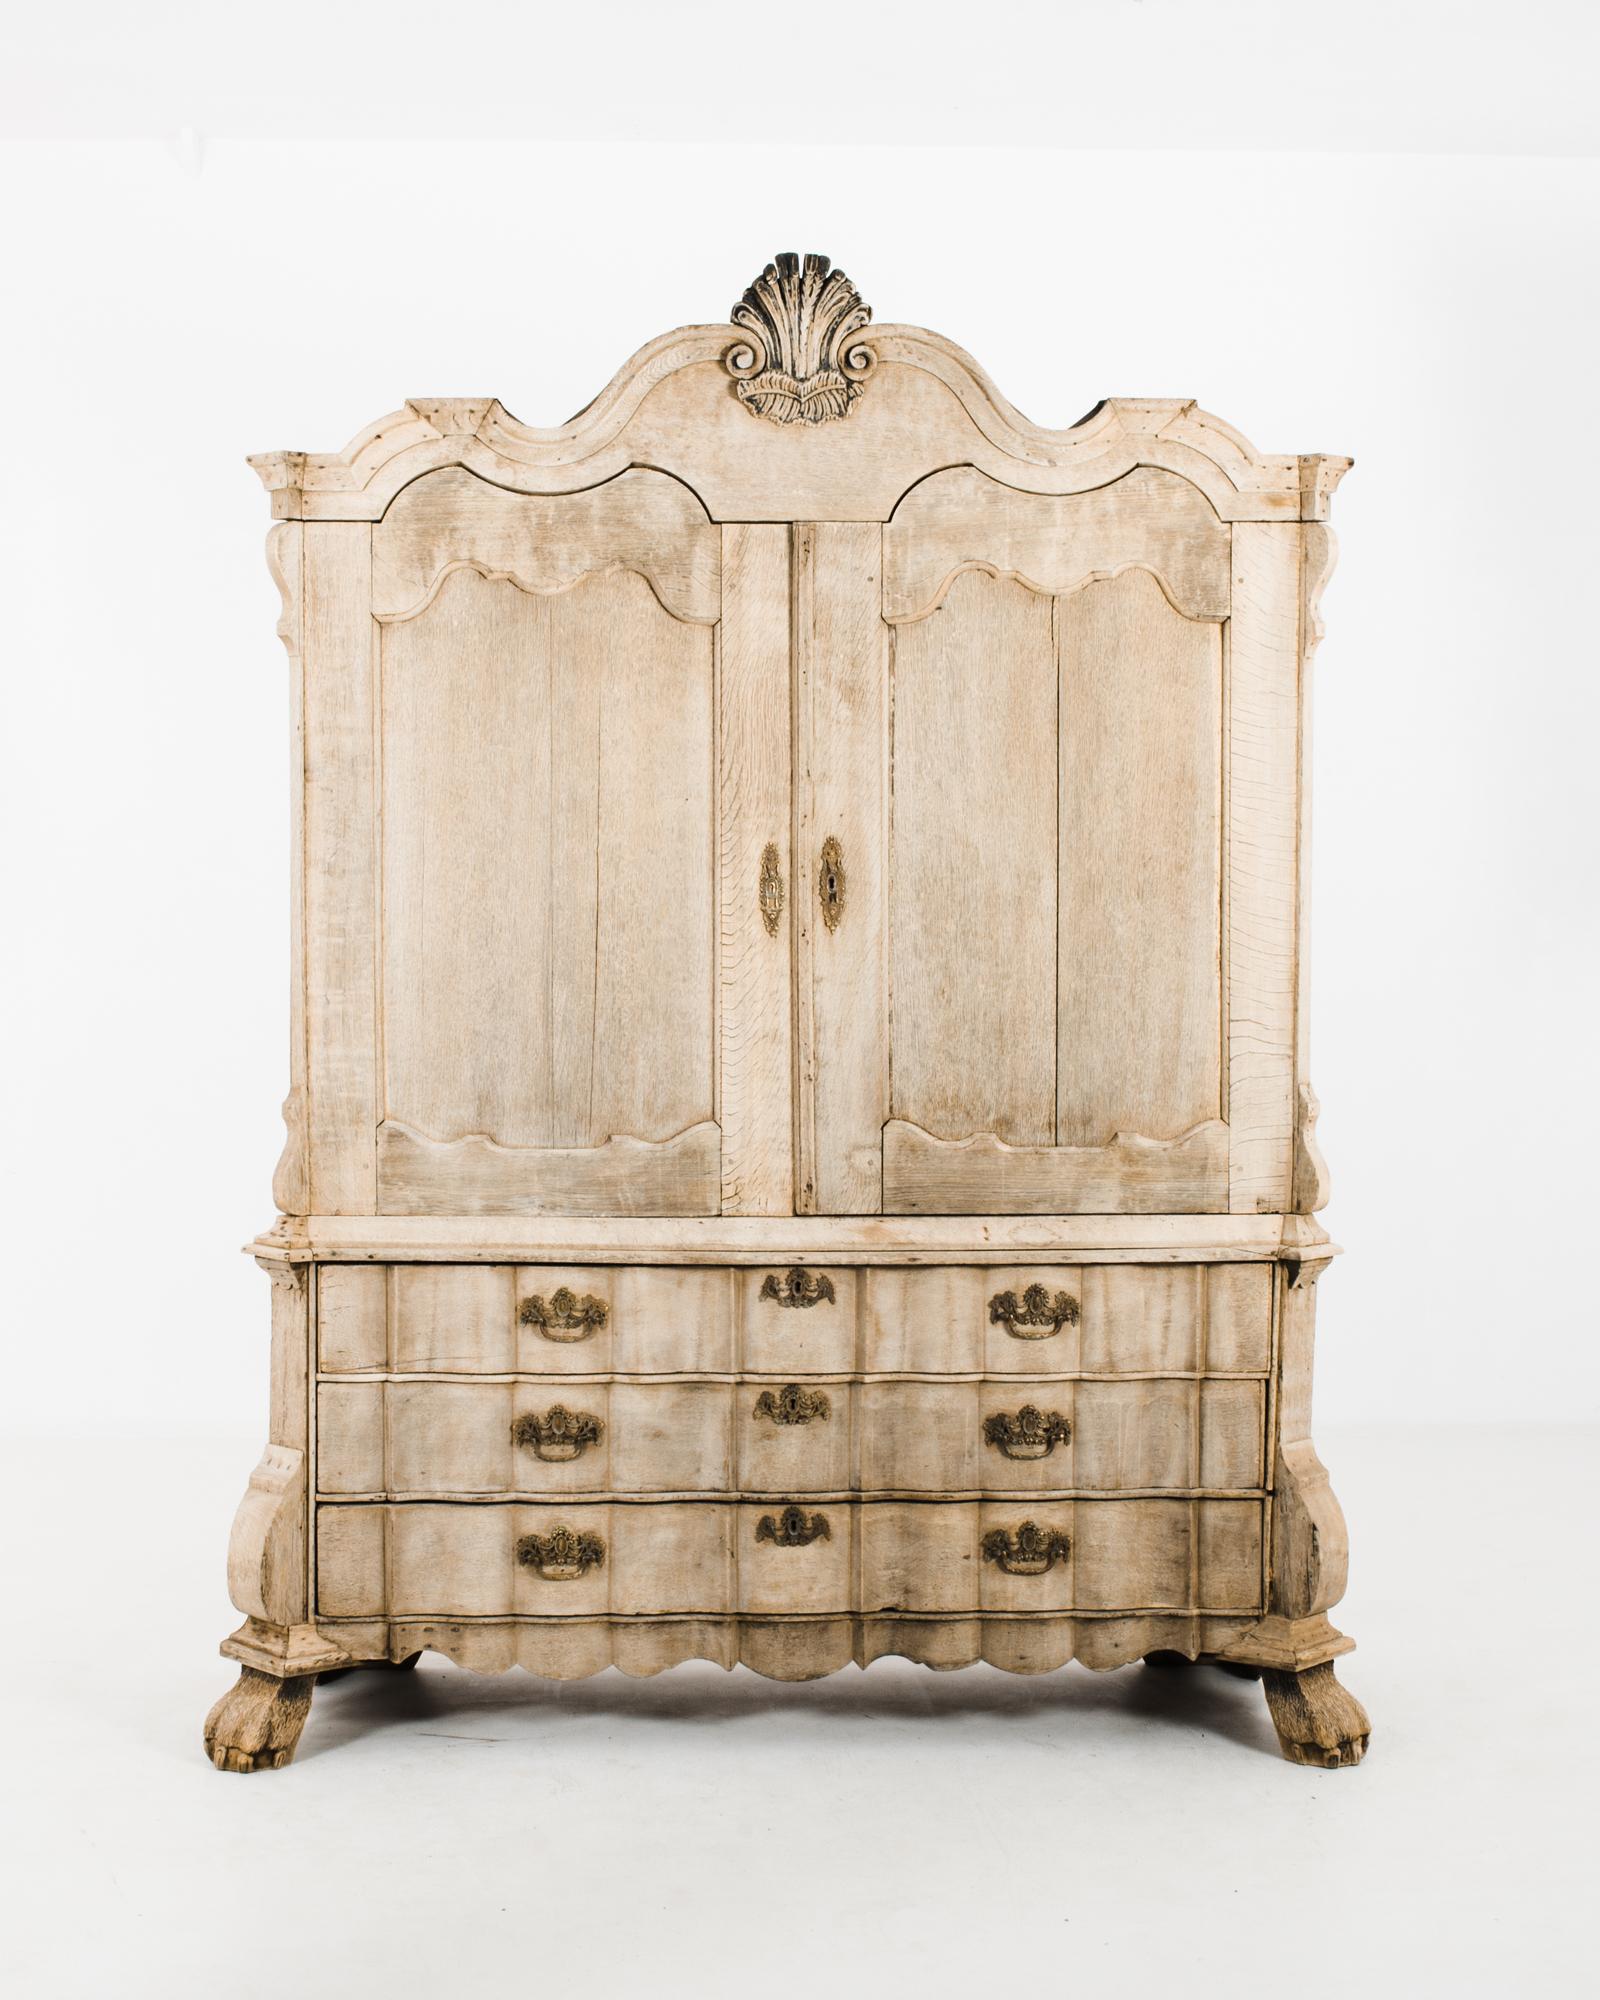 This bleached oak armoire was made in the Netherlands, circa 1780. It features an ornamented crest, popular in eighteenth and nineteenth-century Dutch furniture, with a scallop shell and leaves. The upper cabinet consists of two shelves and three